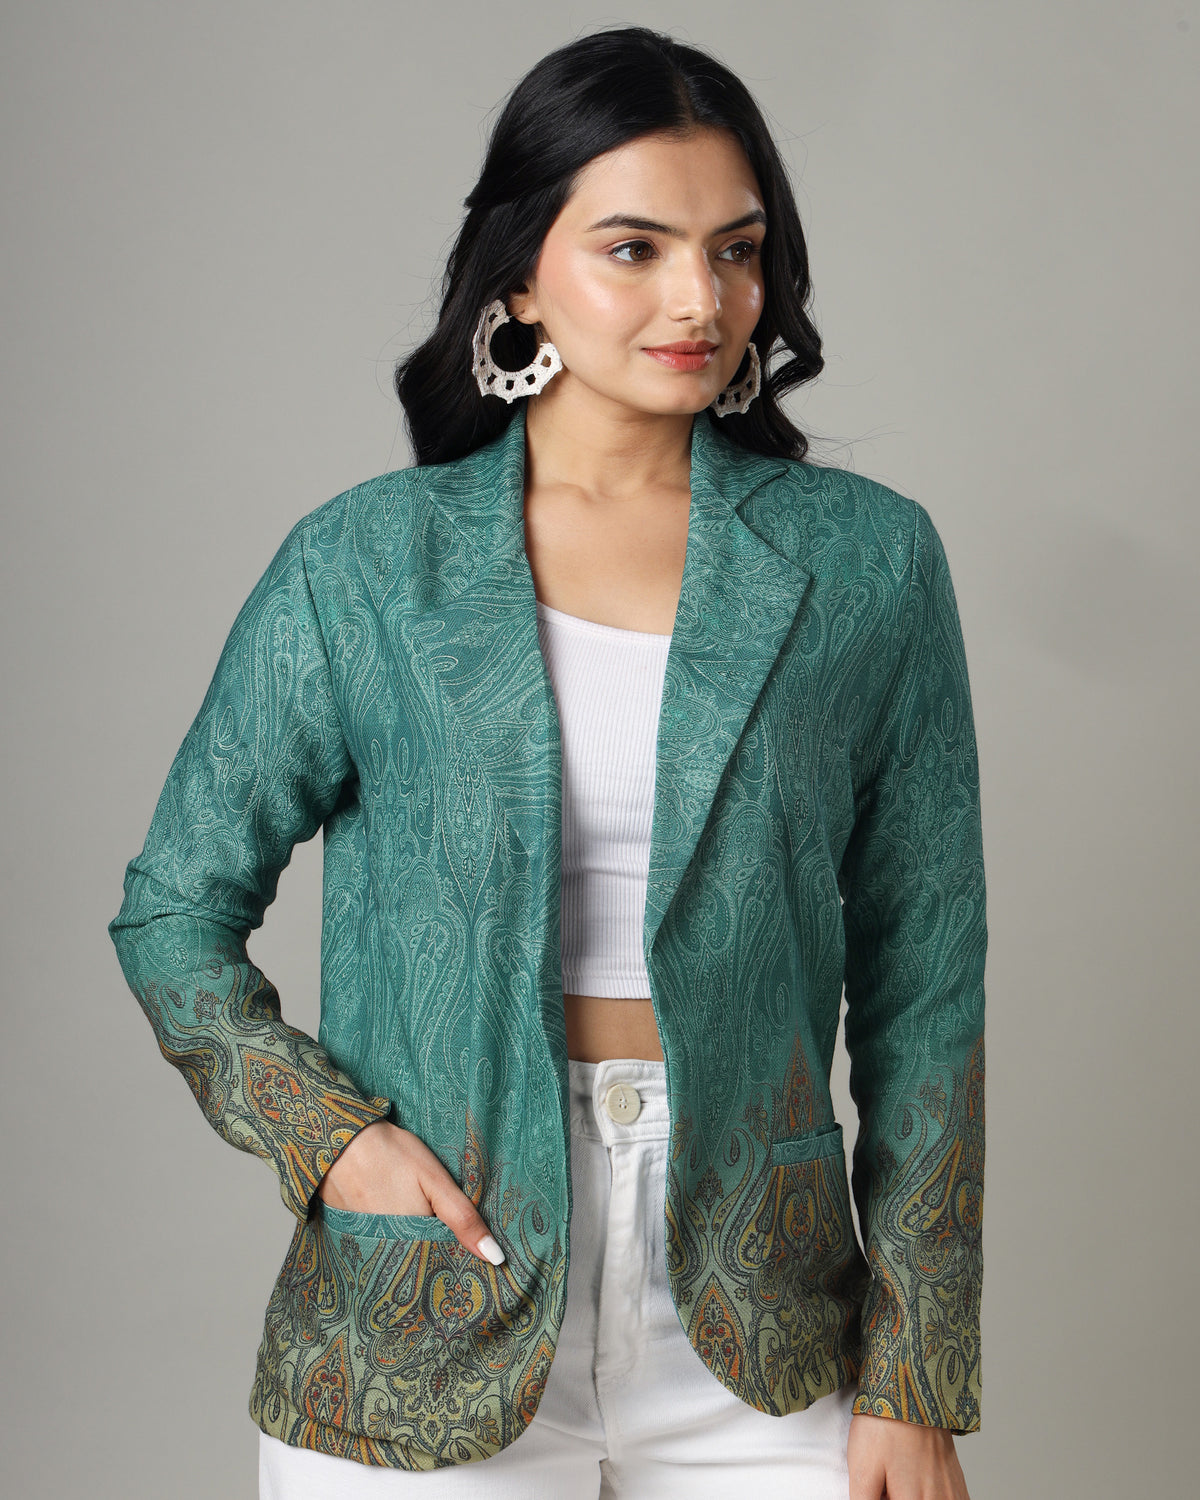 Elevate Any Event With Our Stylish Paisley Jacket